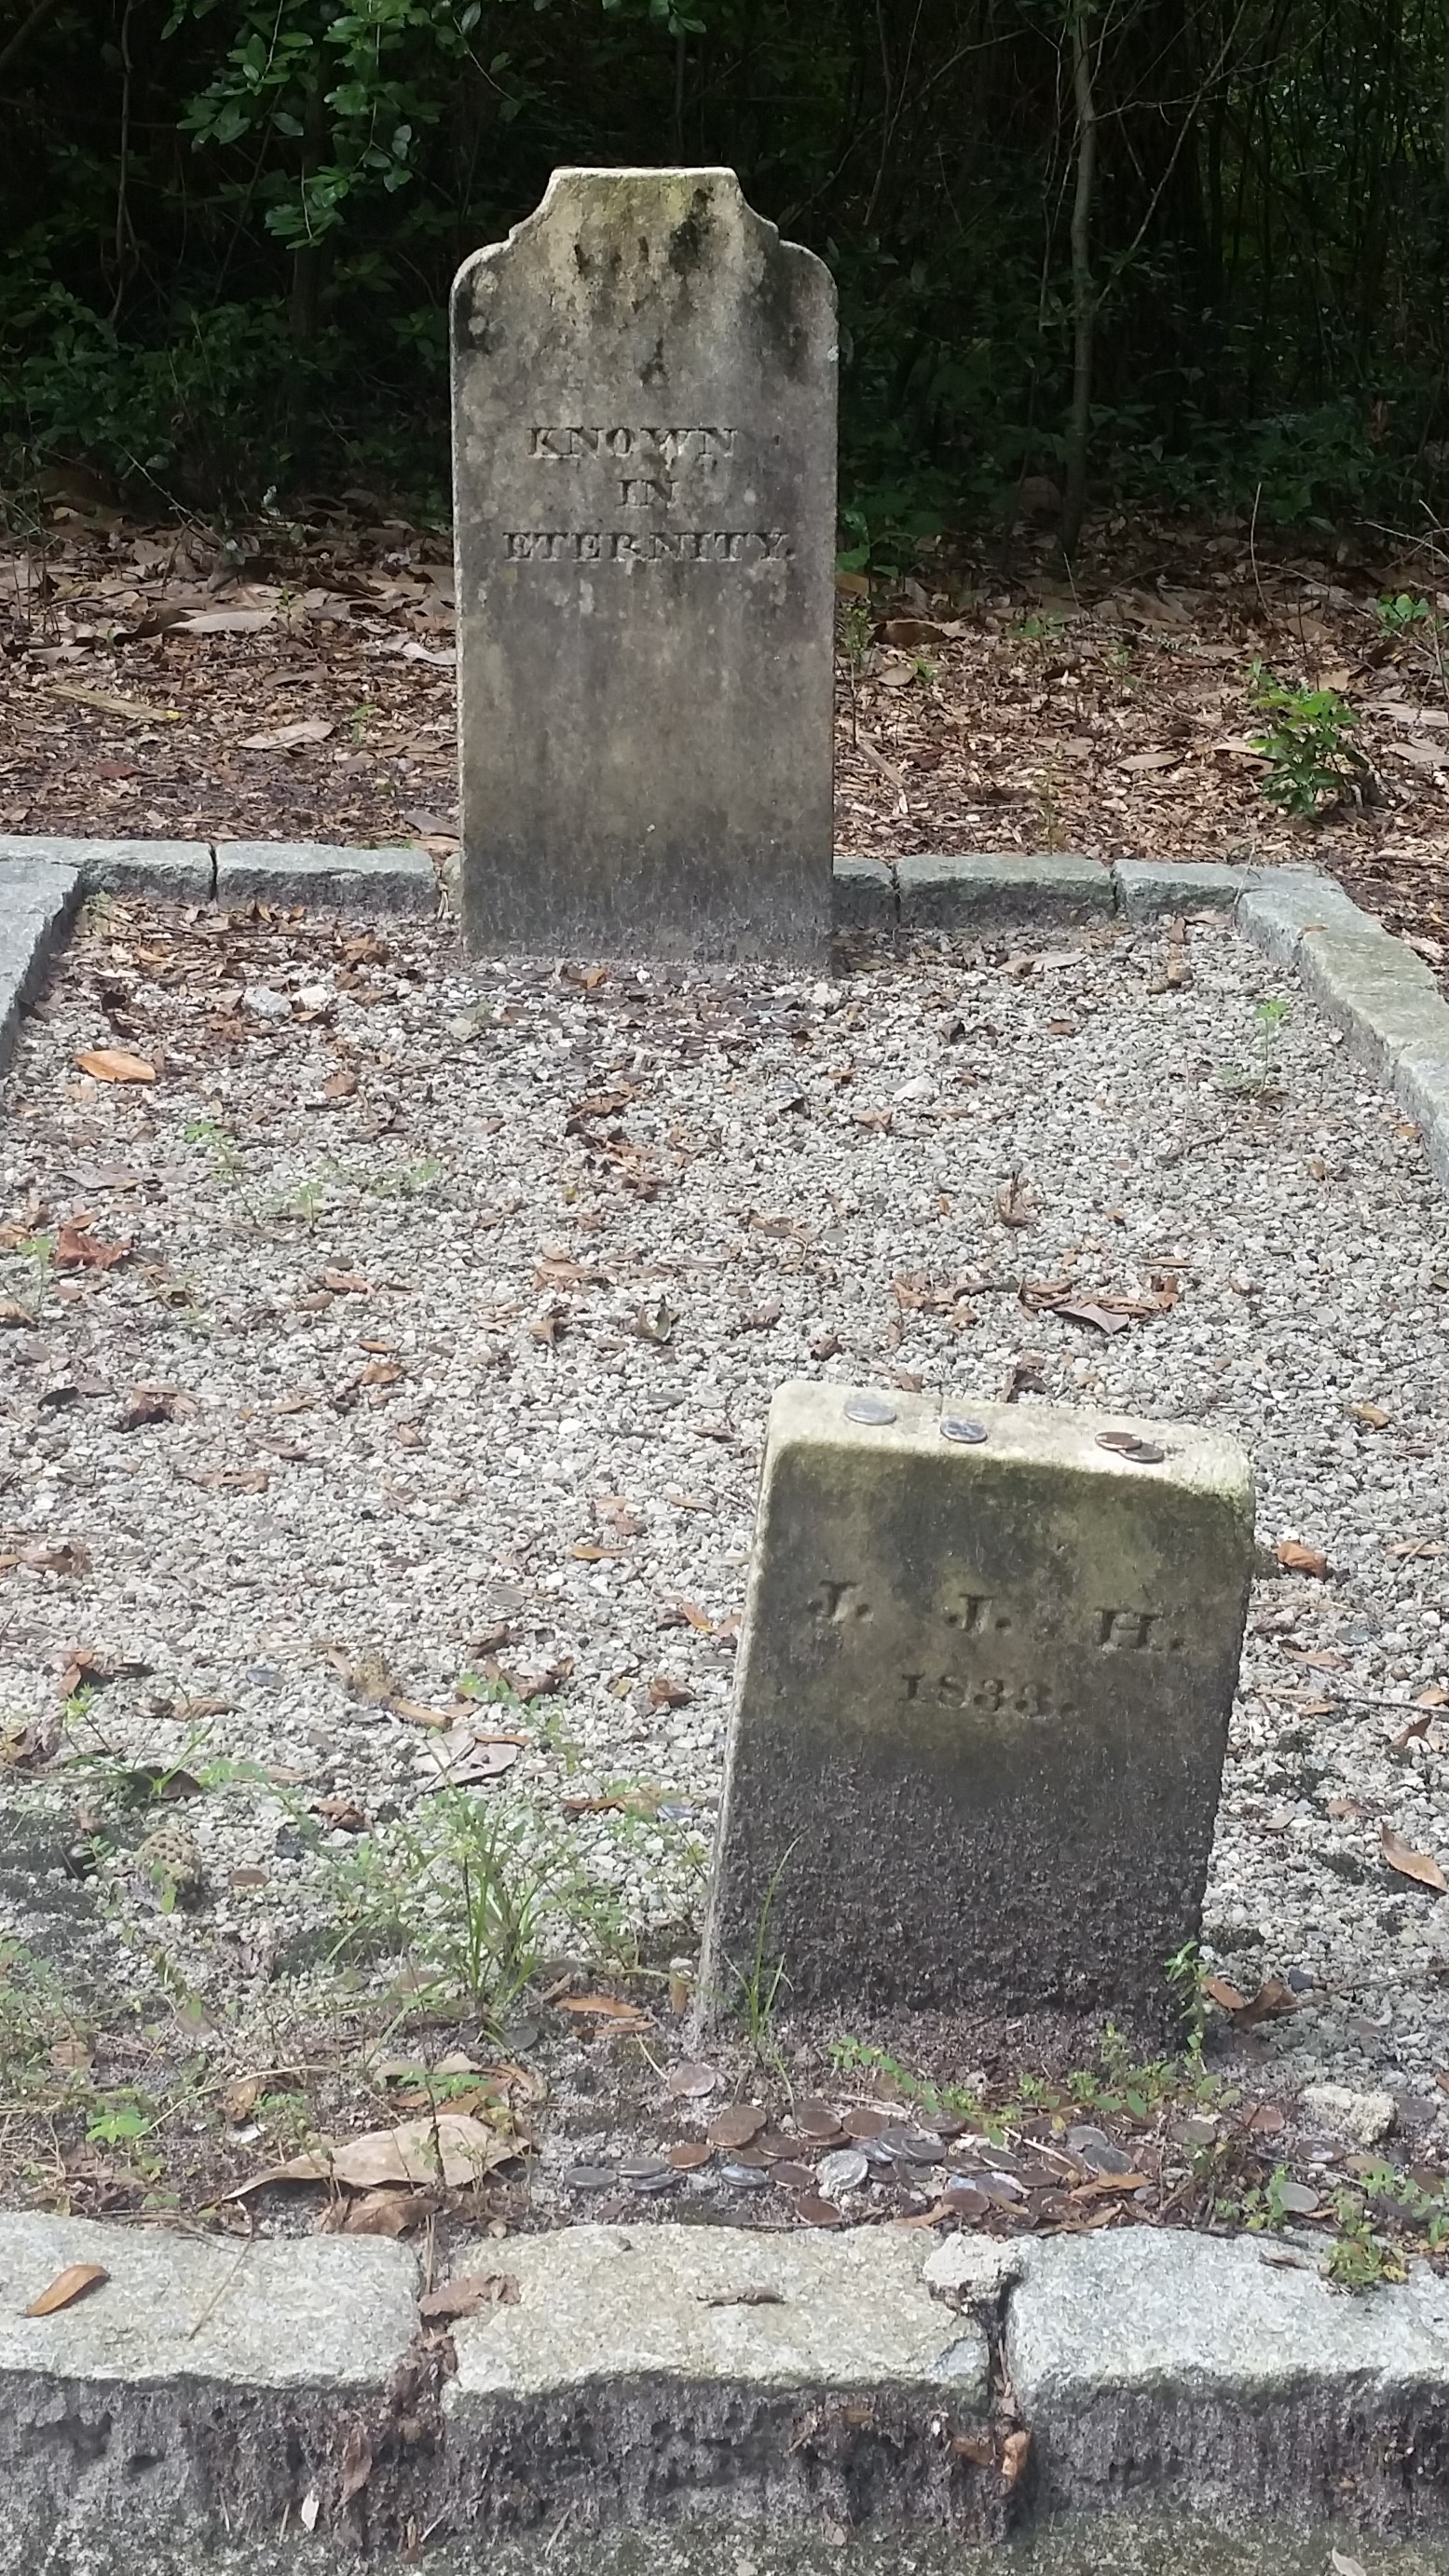 Is the Mystery Grave at Airlie Gardens that of Michel Ney, one of Napoleon’s Marshalls?